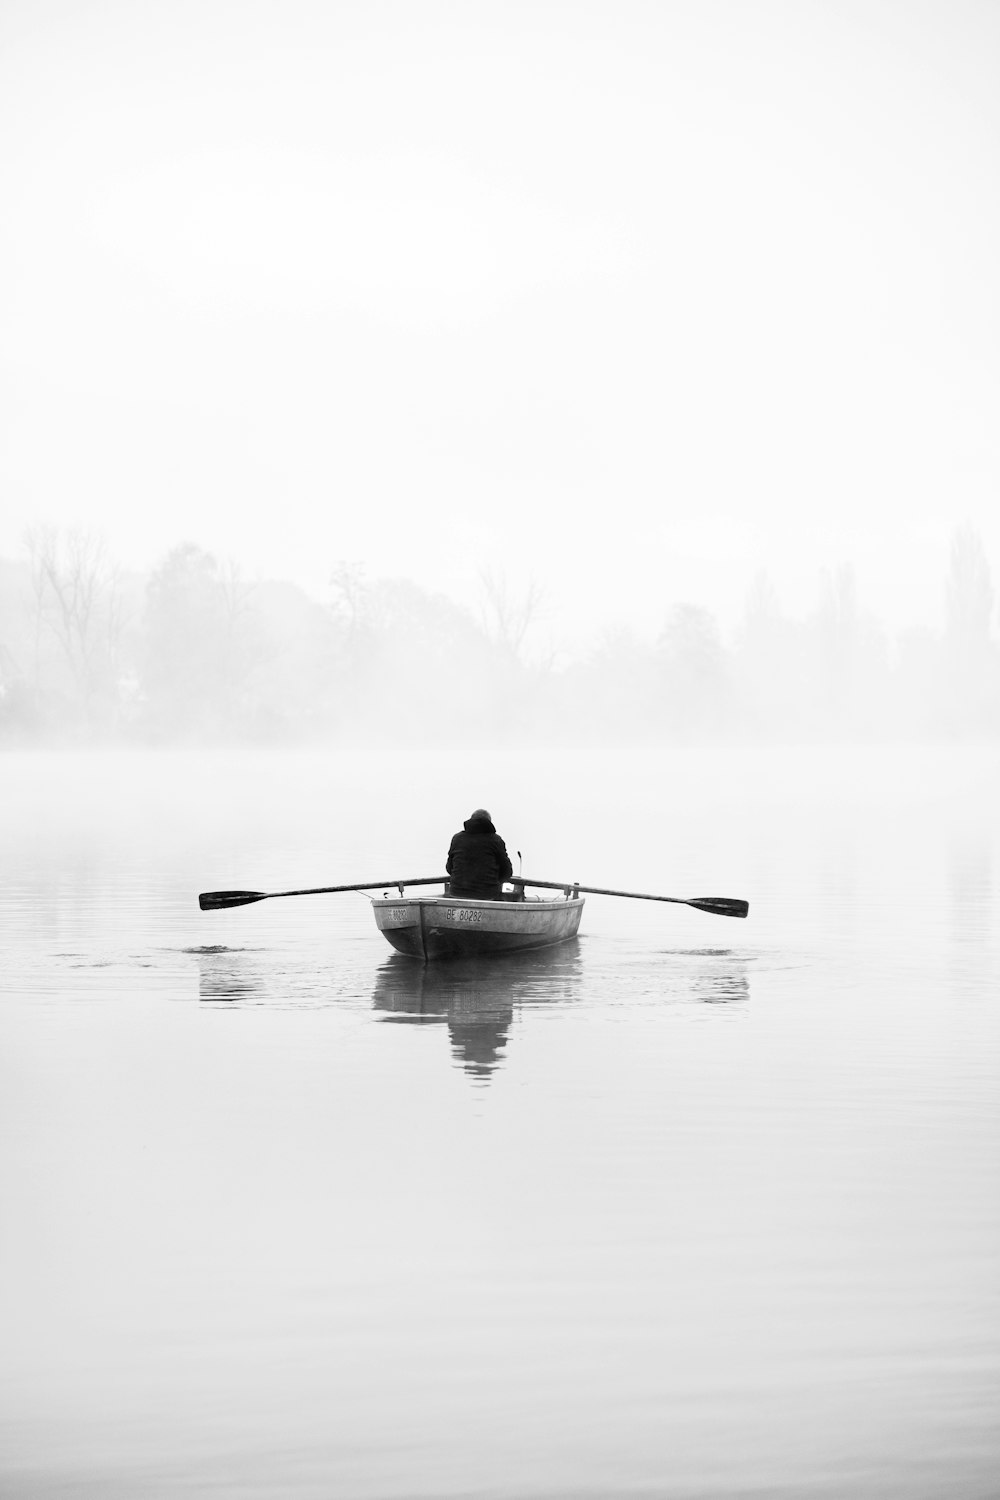 a person in a row boat on a foggy lake